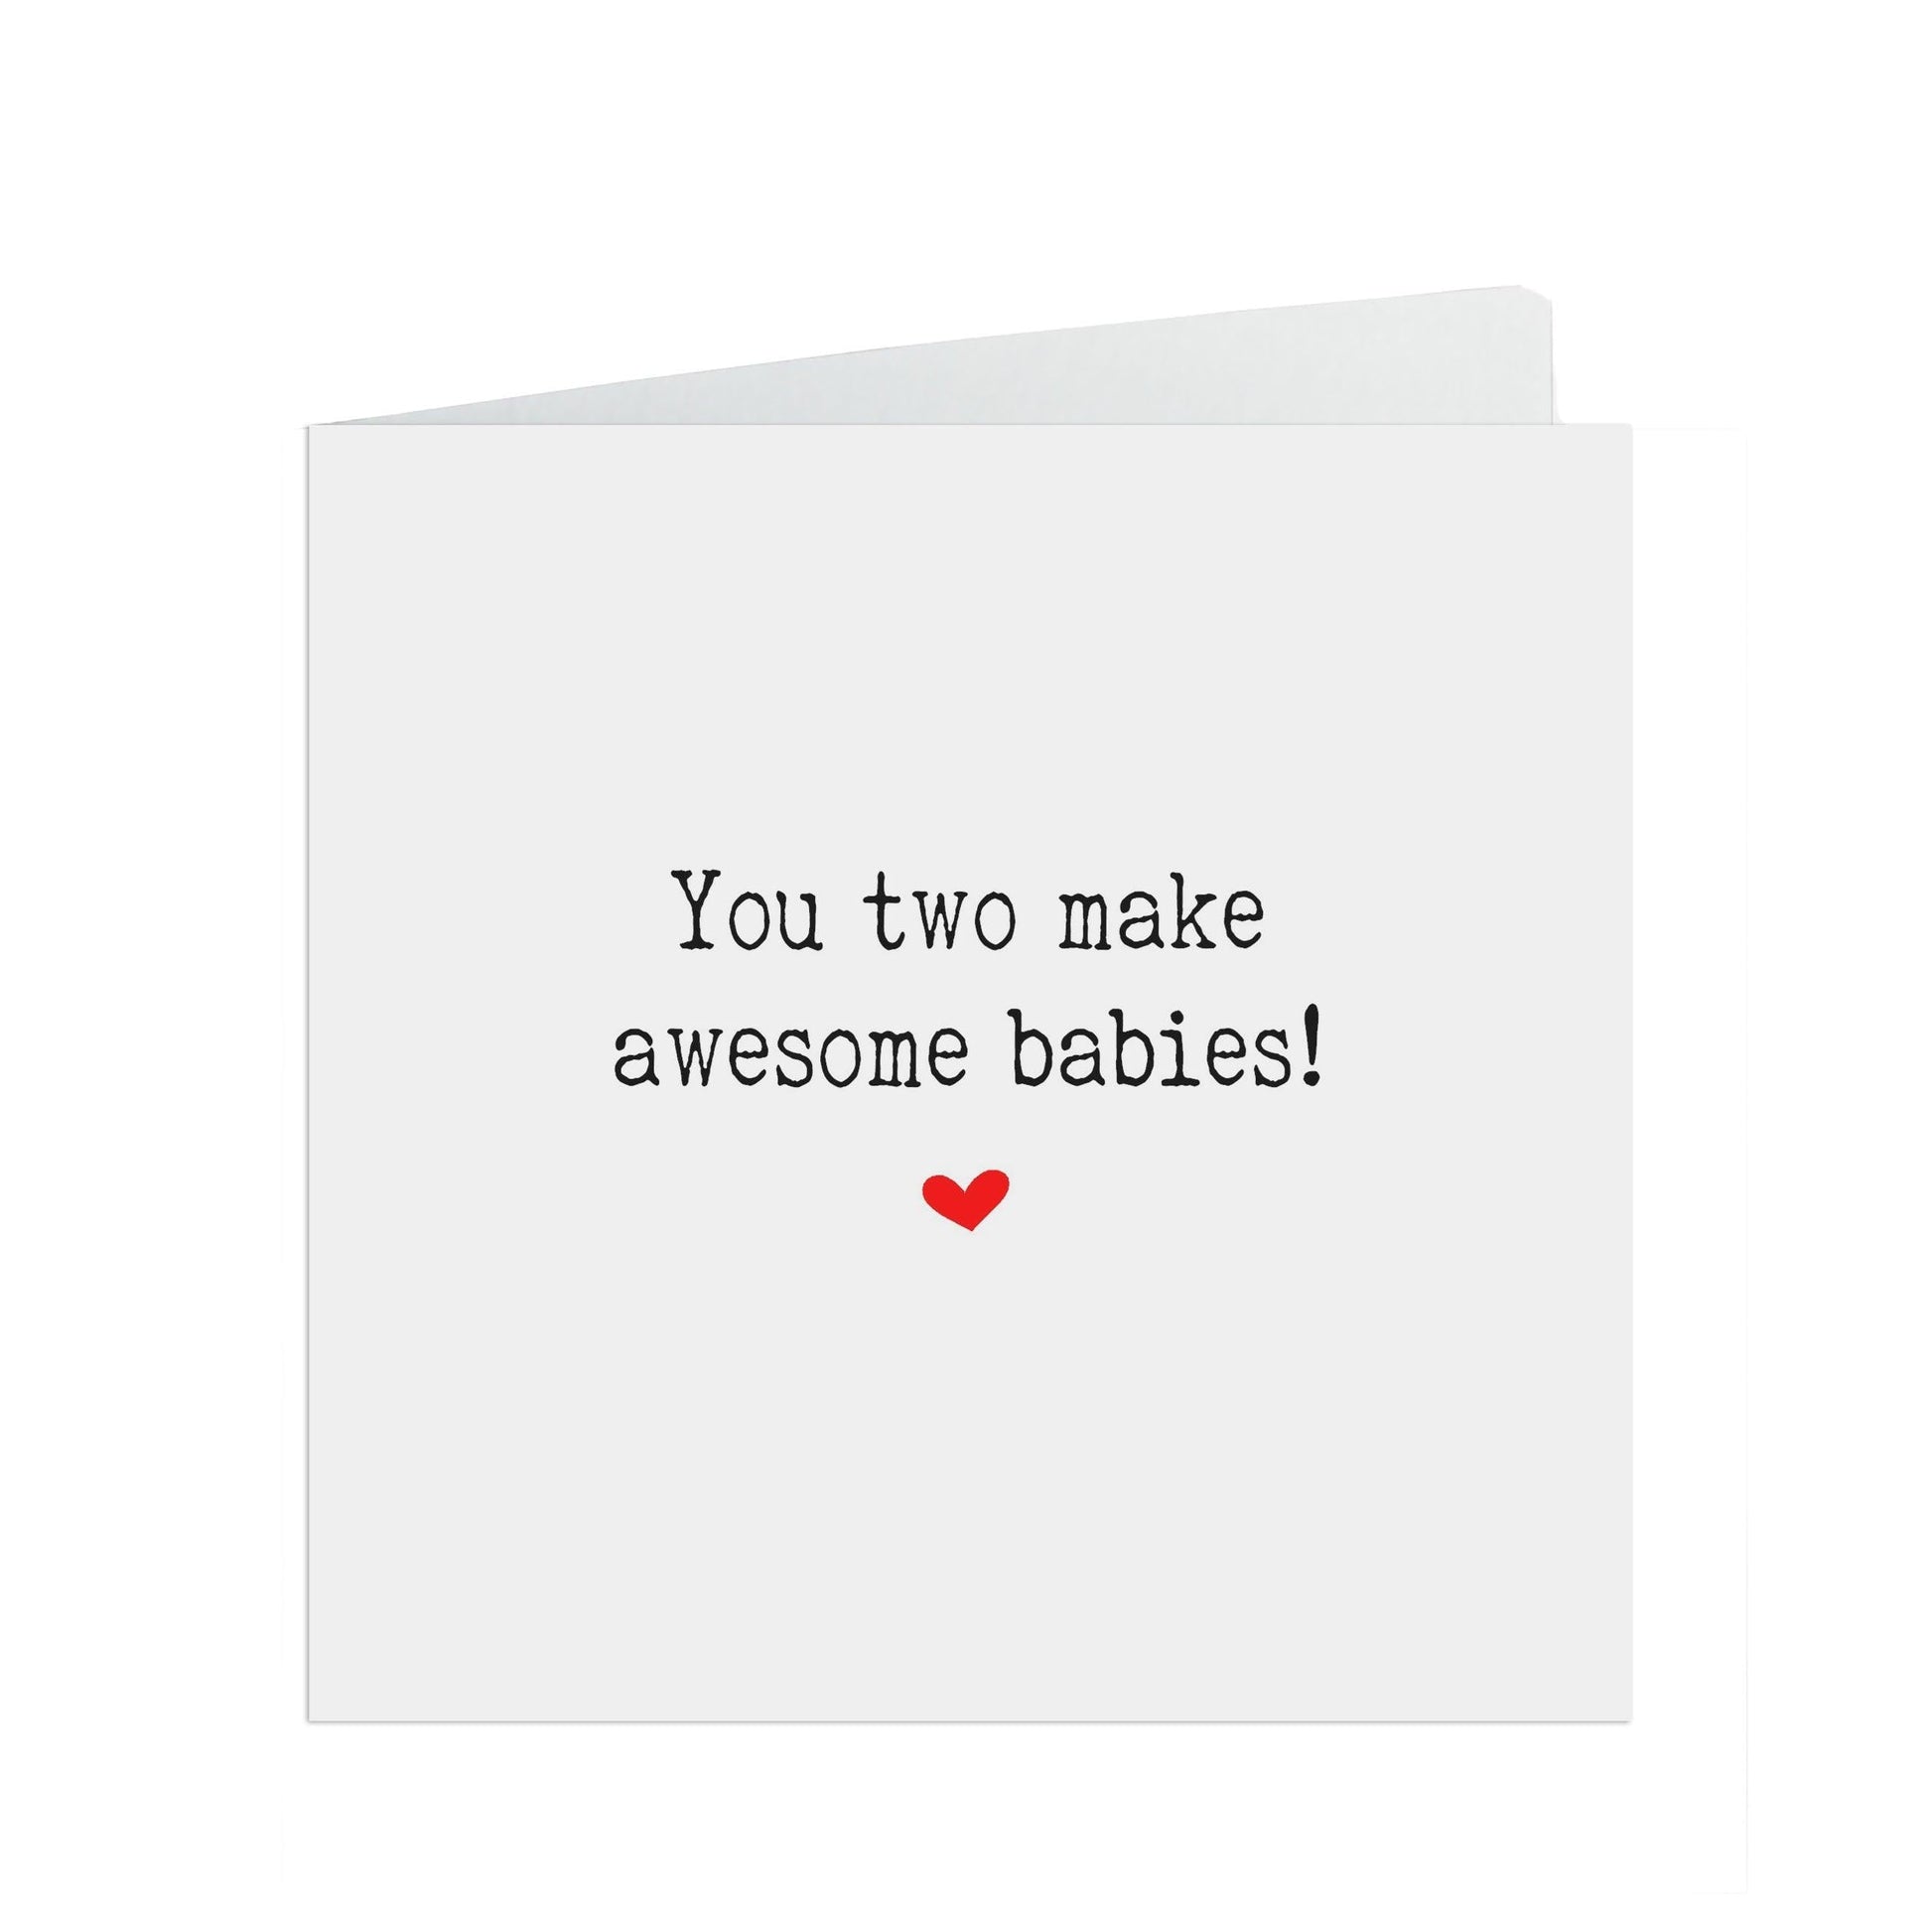  You two make awesome babies! Typewriter new baby card by PMPRINTED 